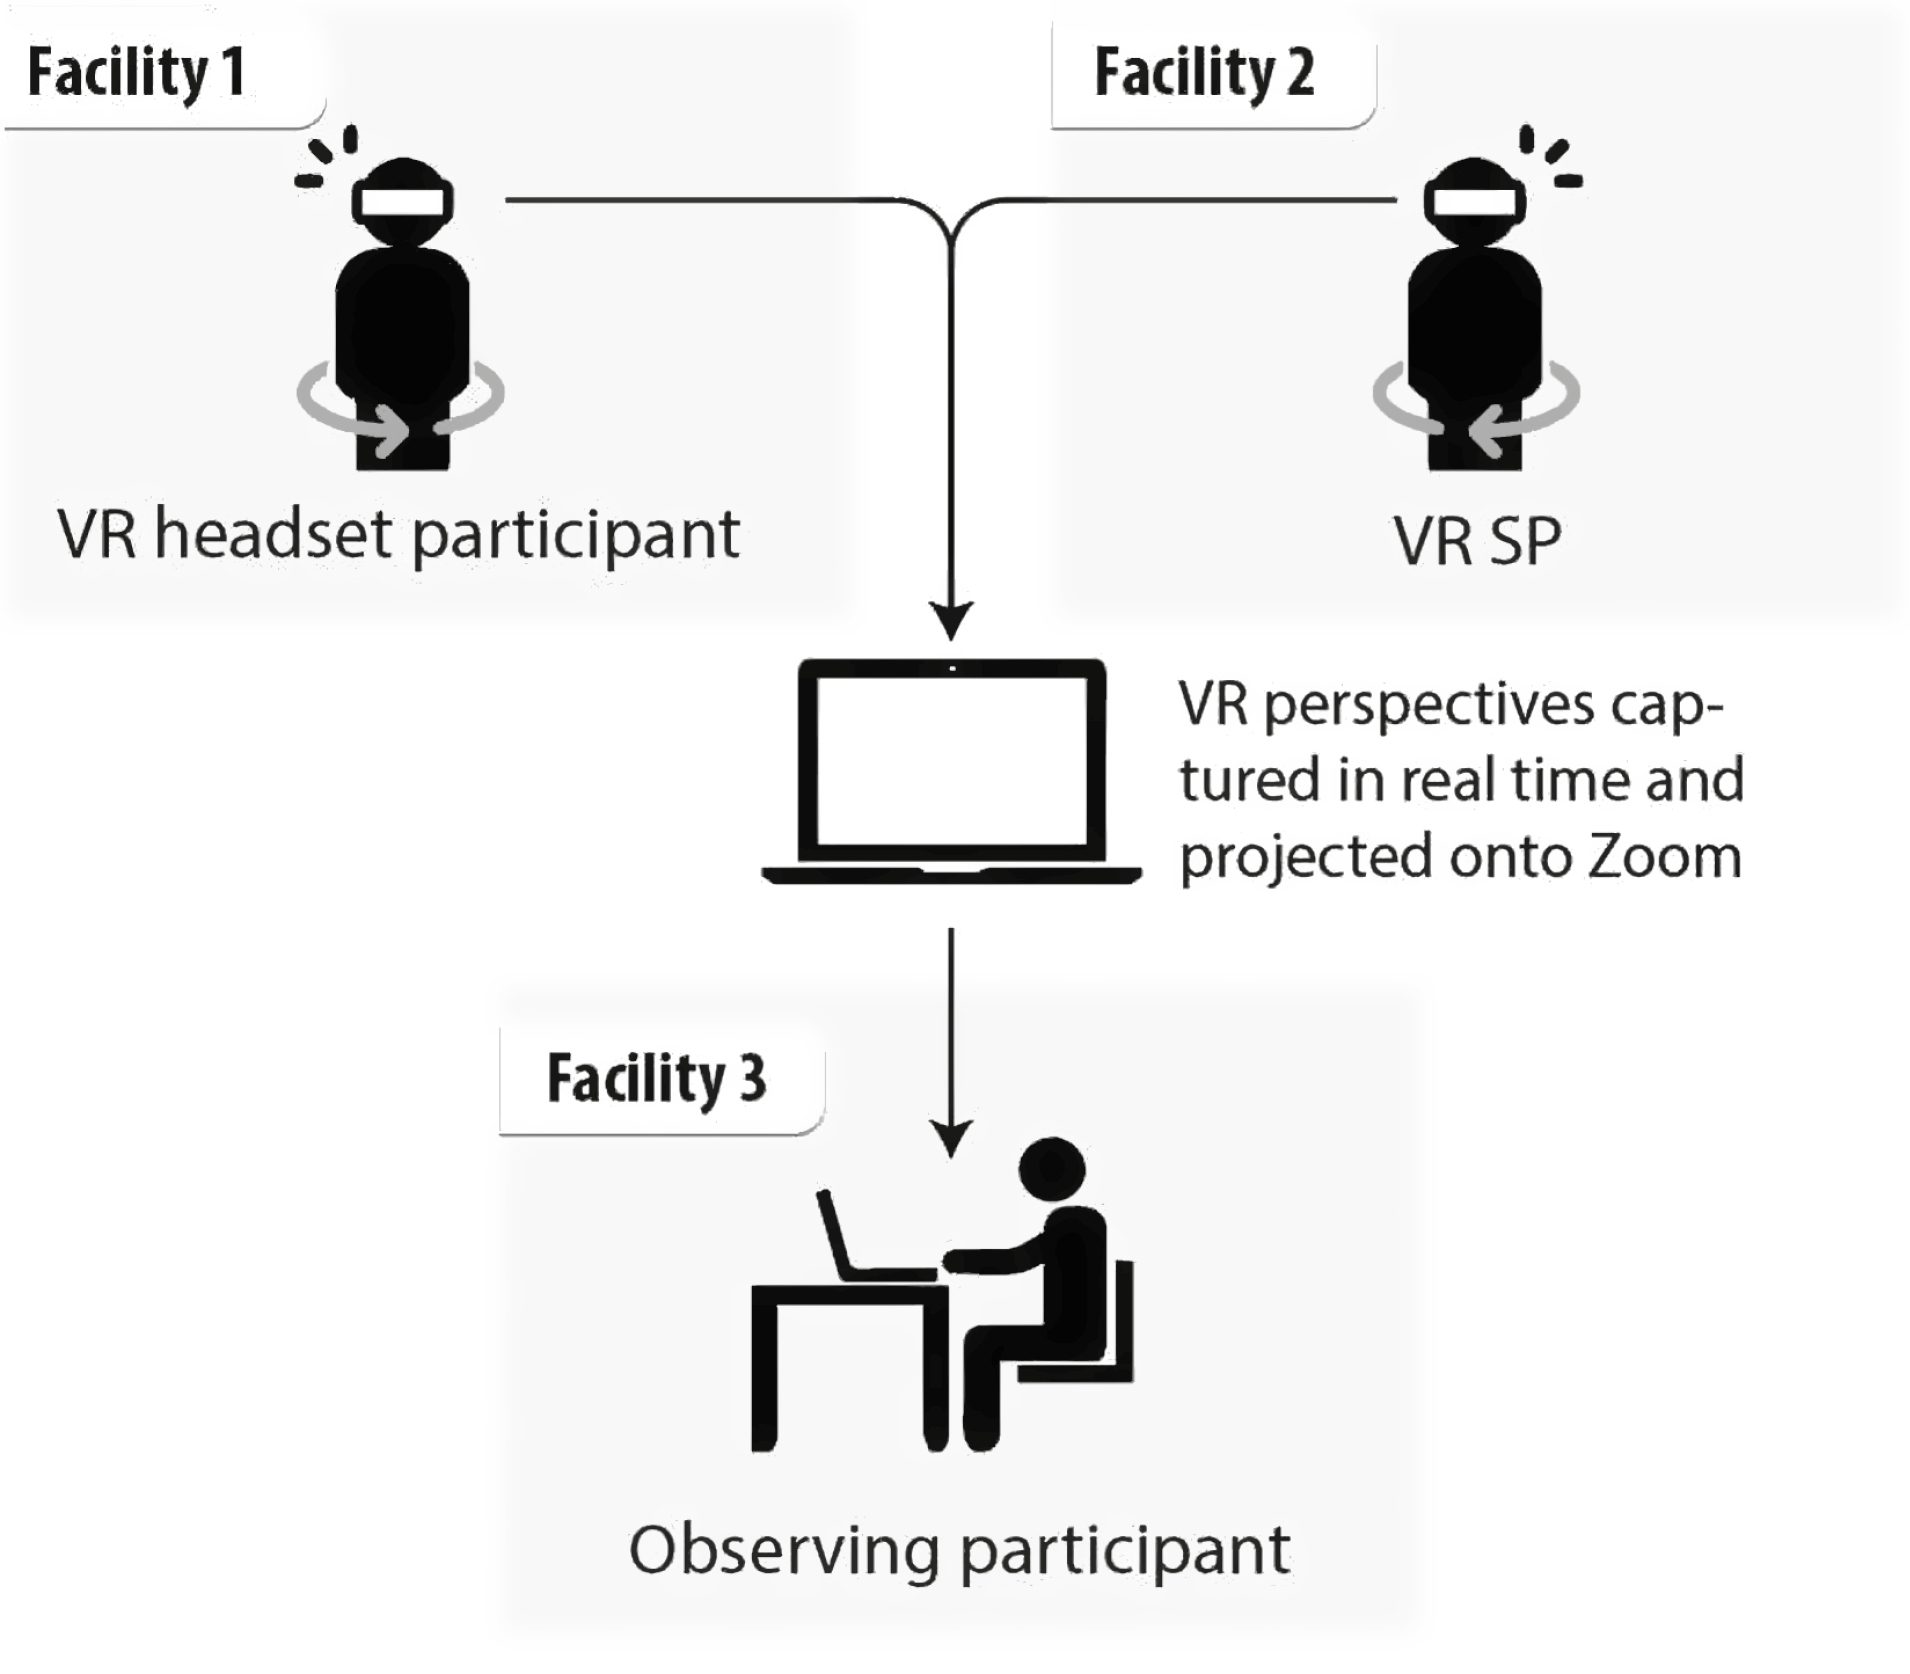 Division of in-headset VR and Zoom observation roles.